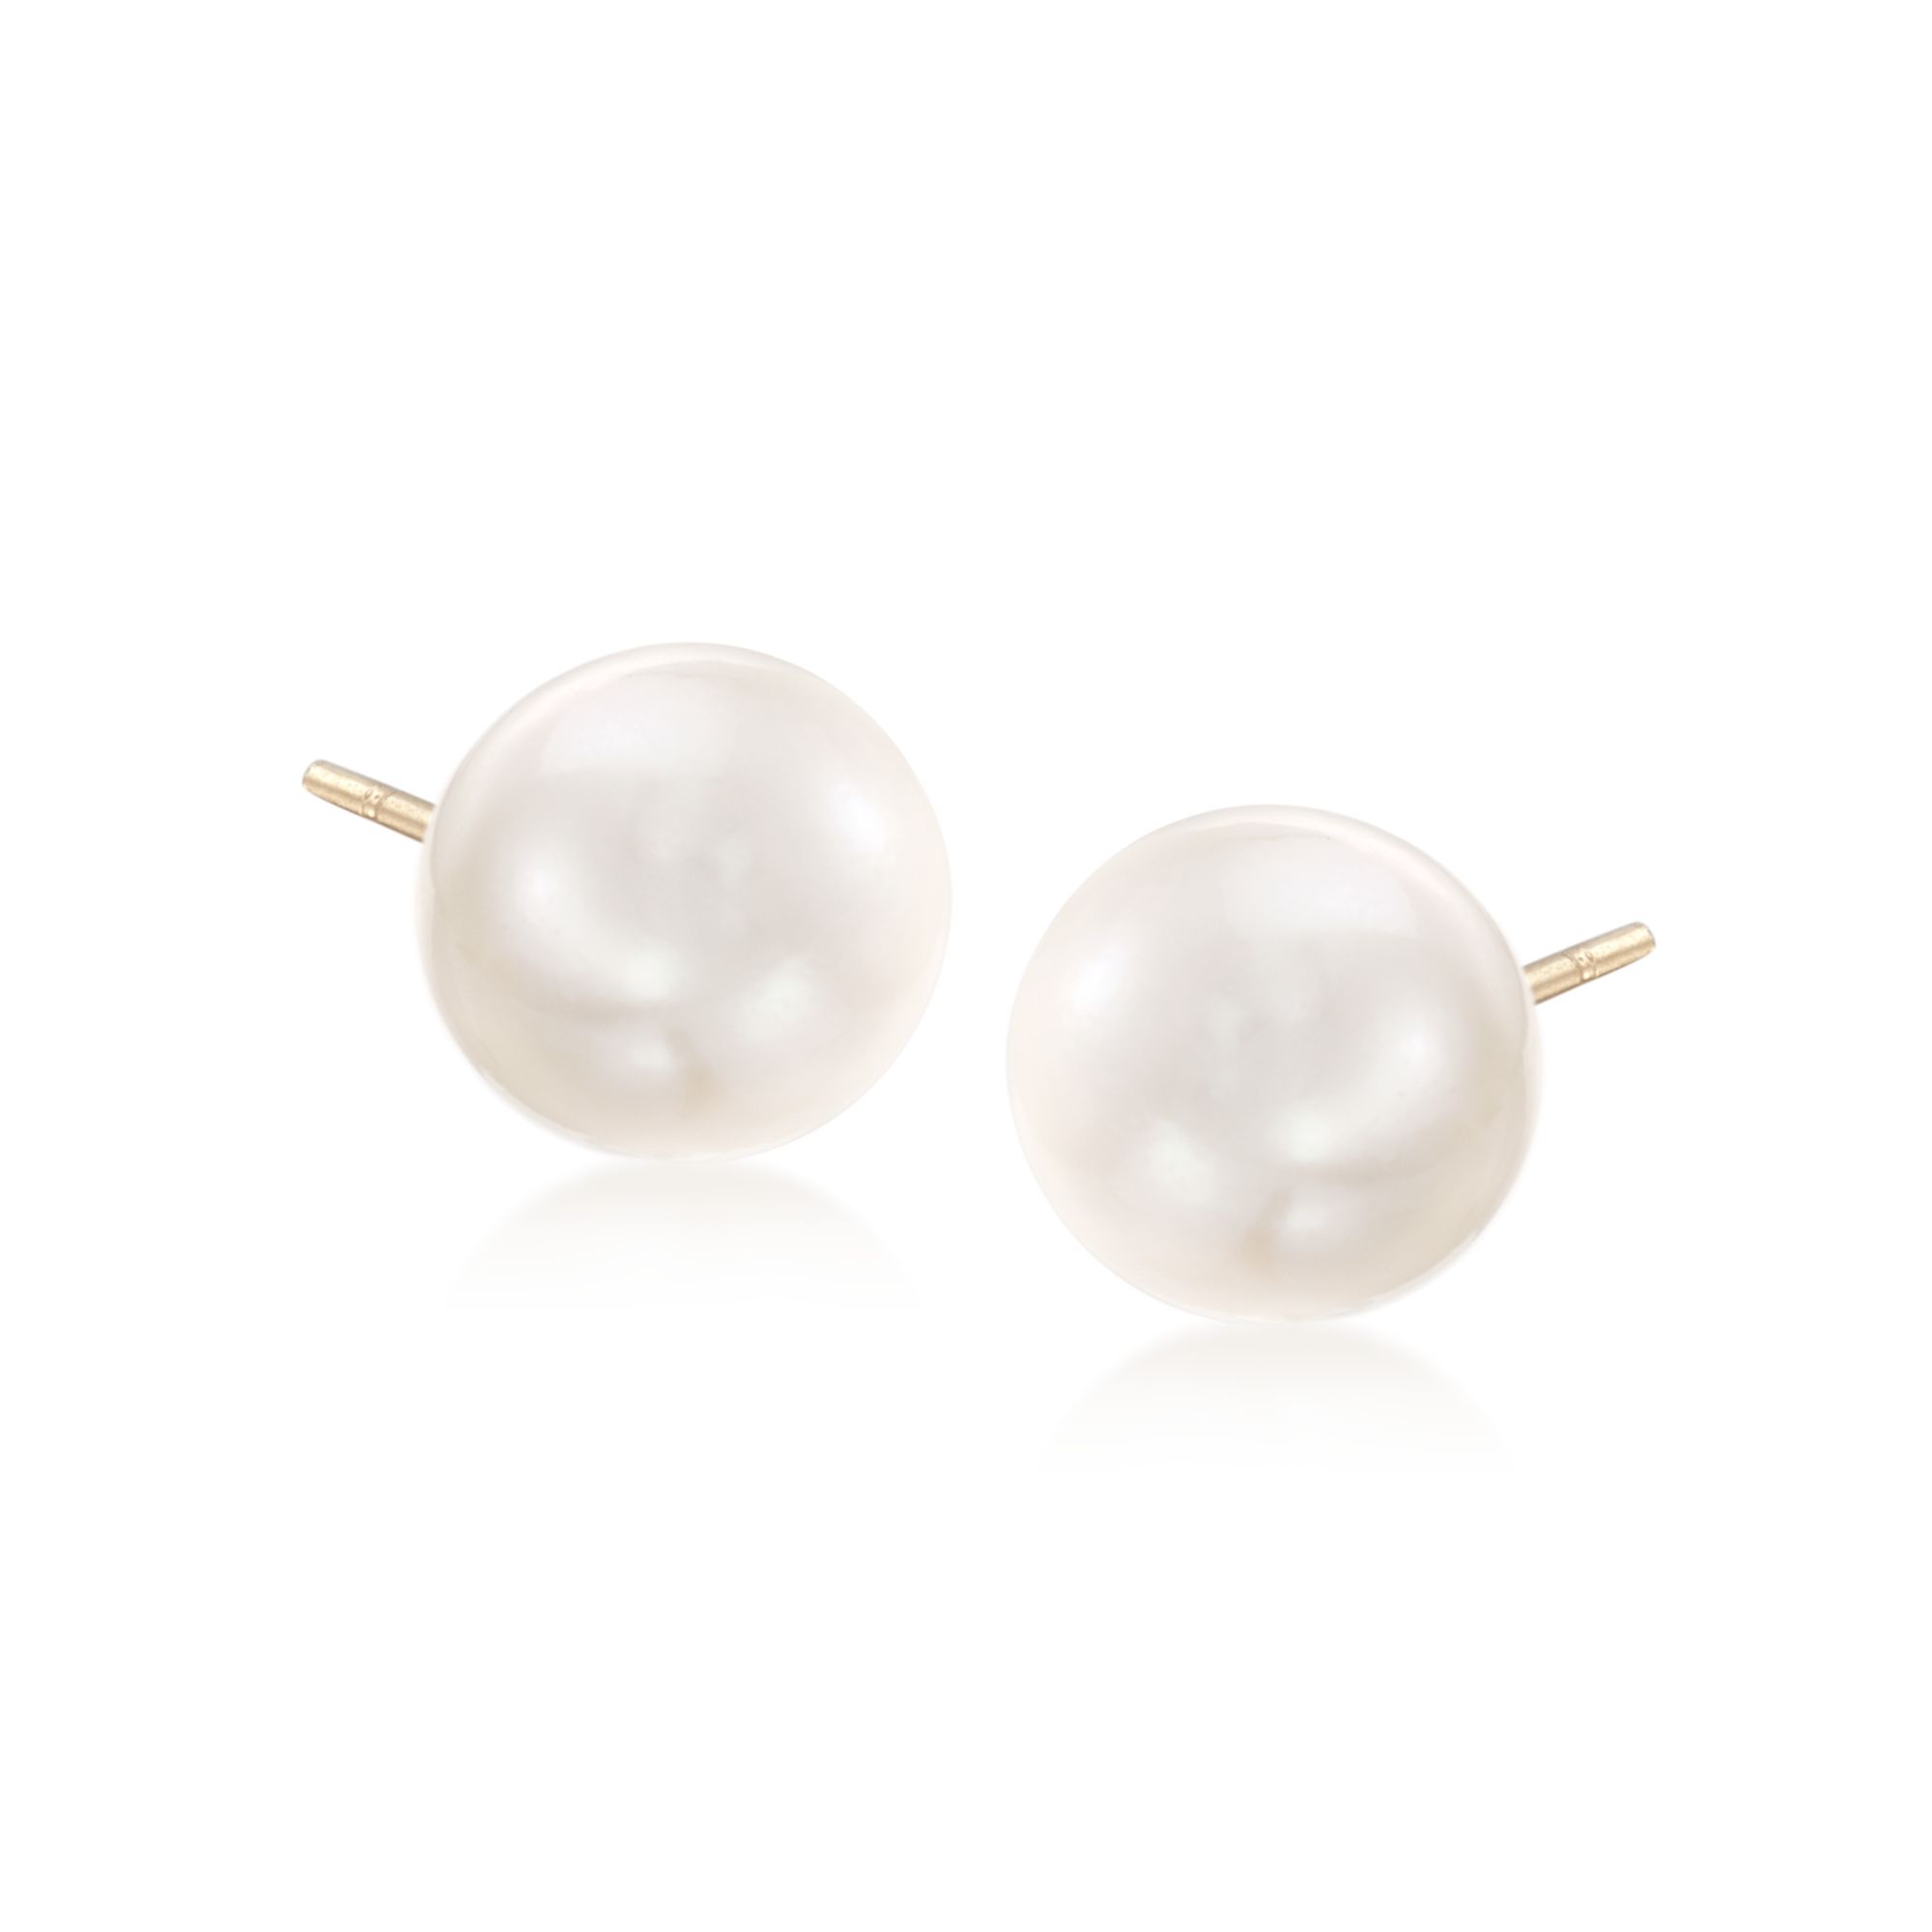 11-12mm Cultured Pearl Stud Earrings in 14kt Yellow Gold | Ross-Simons